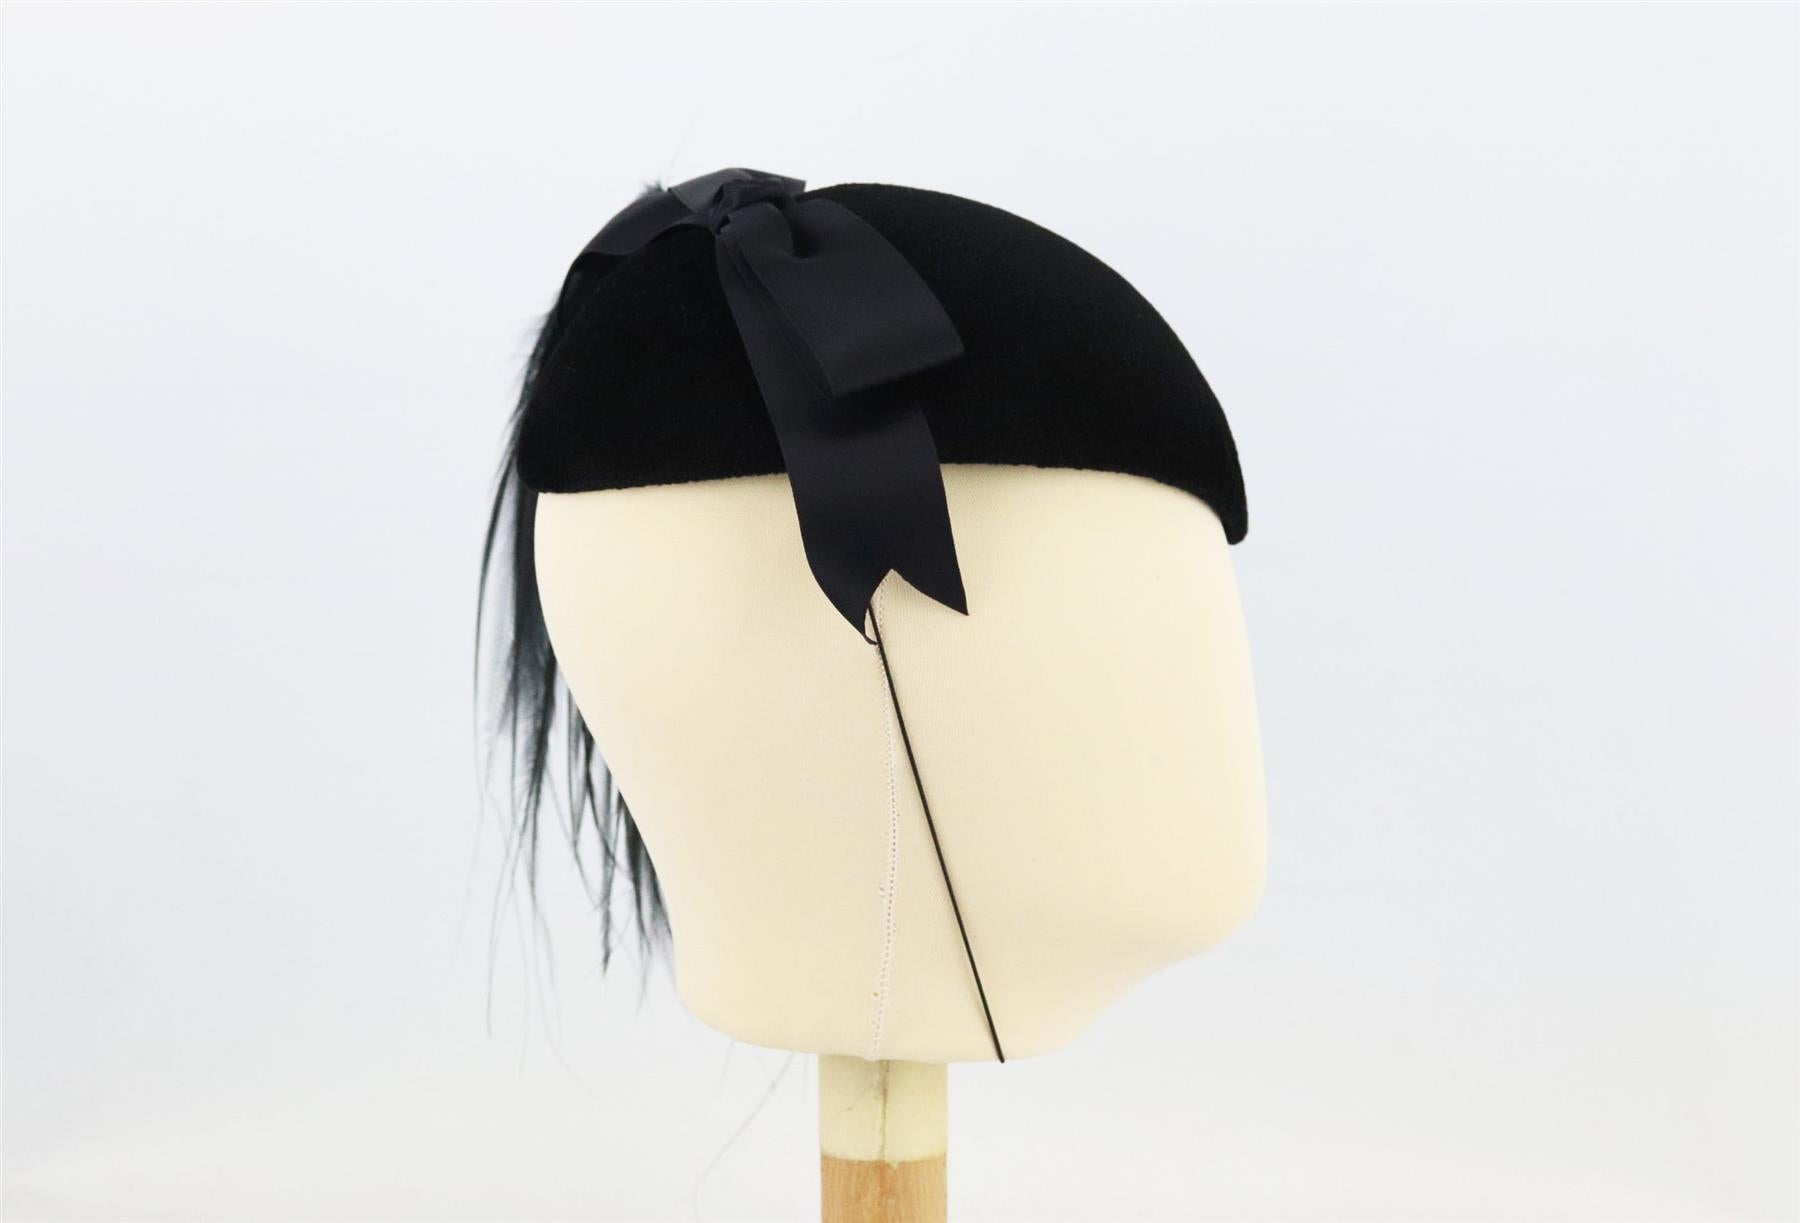 This fascinator by Philip Sommerville for Harrods is set on a teardrop-shaped base, this fascinator is made from wool-felt with feather and silk bow detail at the top. Black wool-felt. Elasticated strap fastening. 100% Wool. Does not come with box.